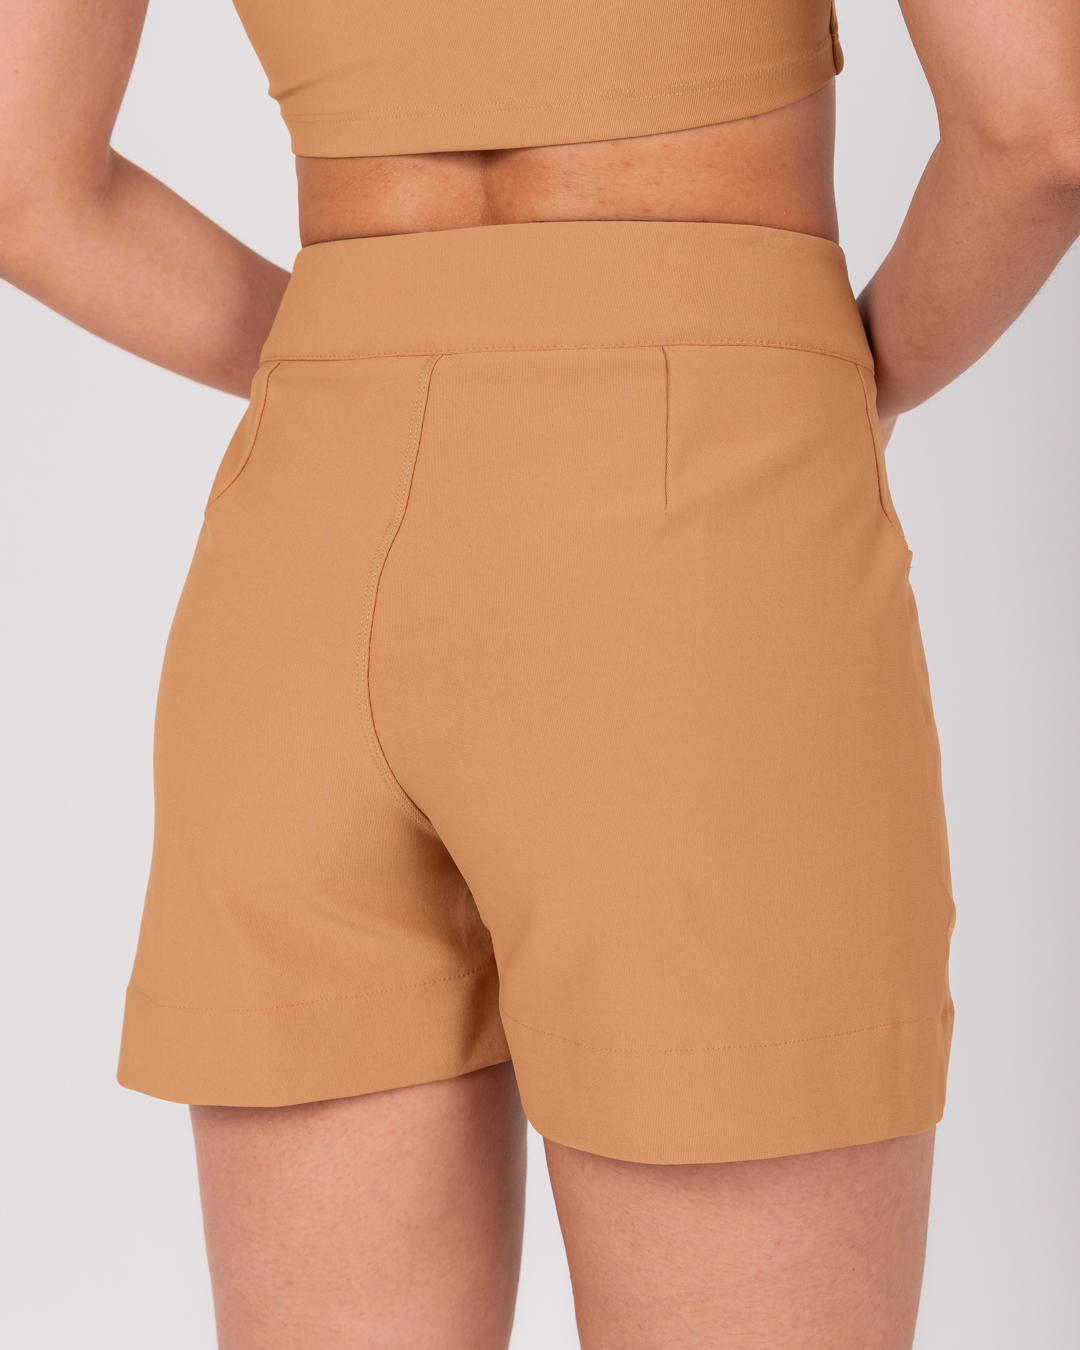 Miss Misses - Short Miss Misses With Pocket and Caramel Button - 54048134